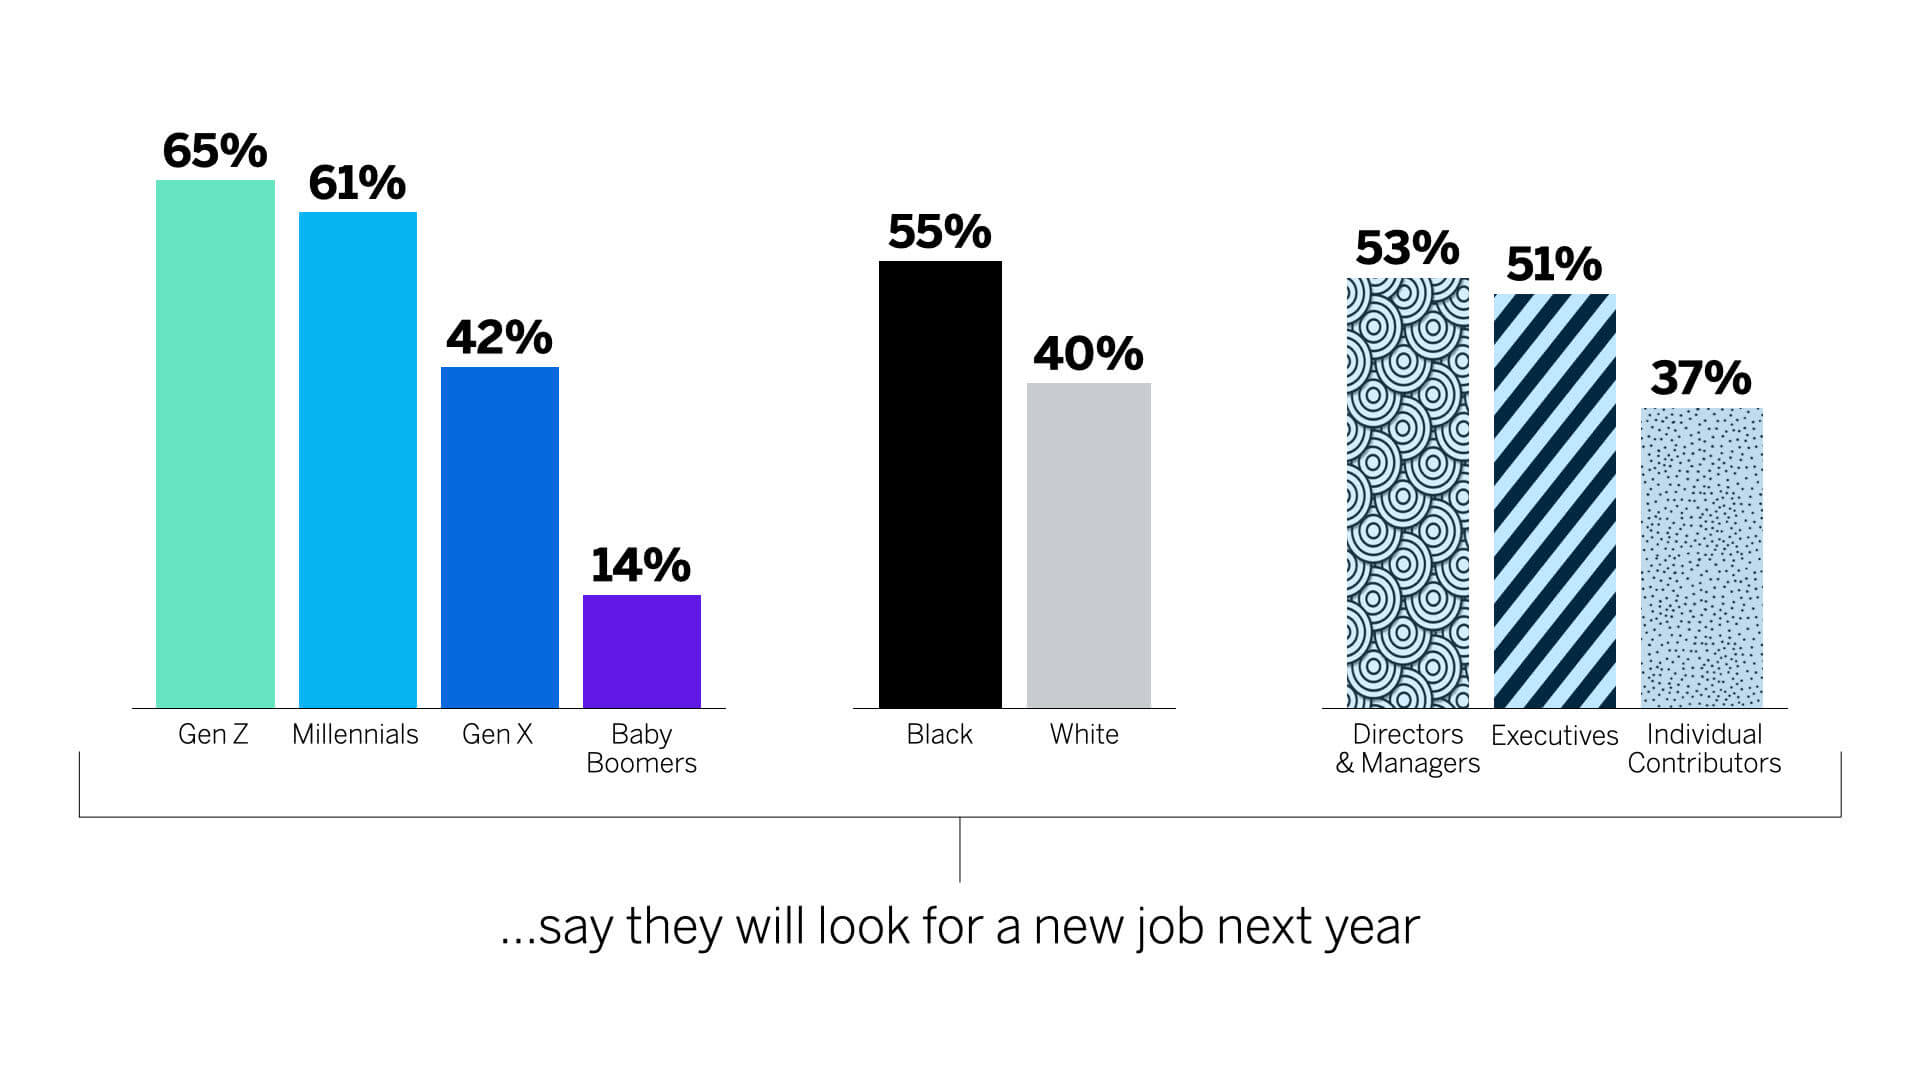 Percent of different people looking for new job in the next year